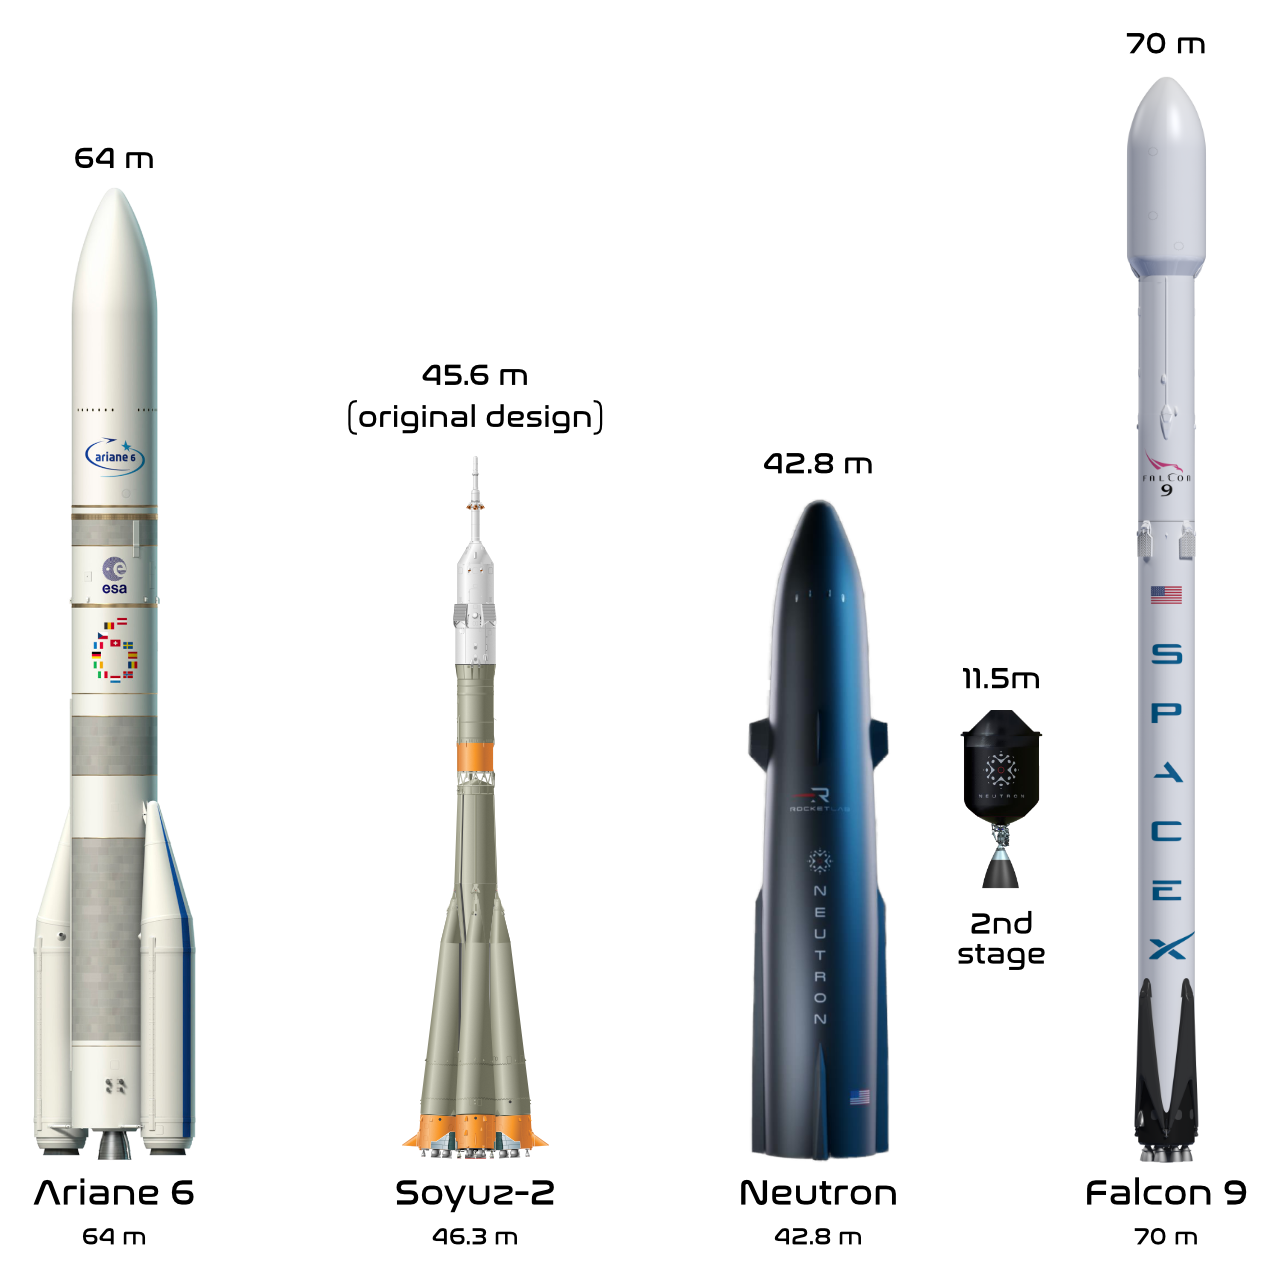 Well known rockets next to Neutron. The secod stage of Neutron is shown separate since it is contained within Neutron rather than being stacked.